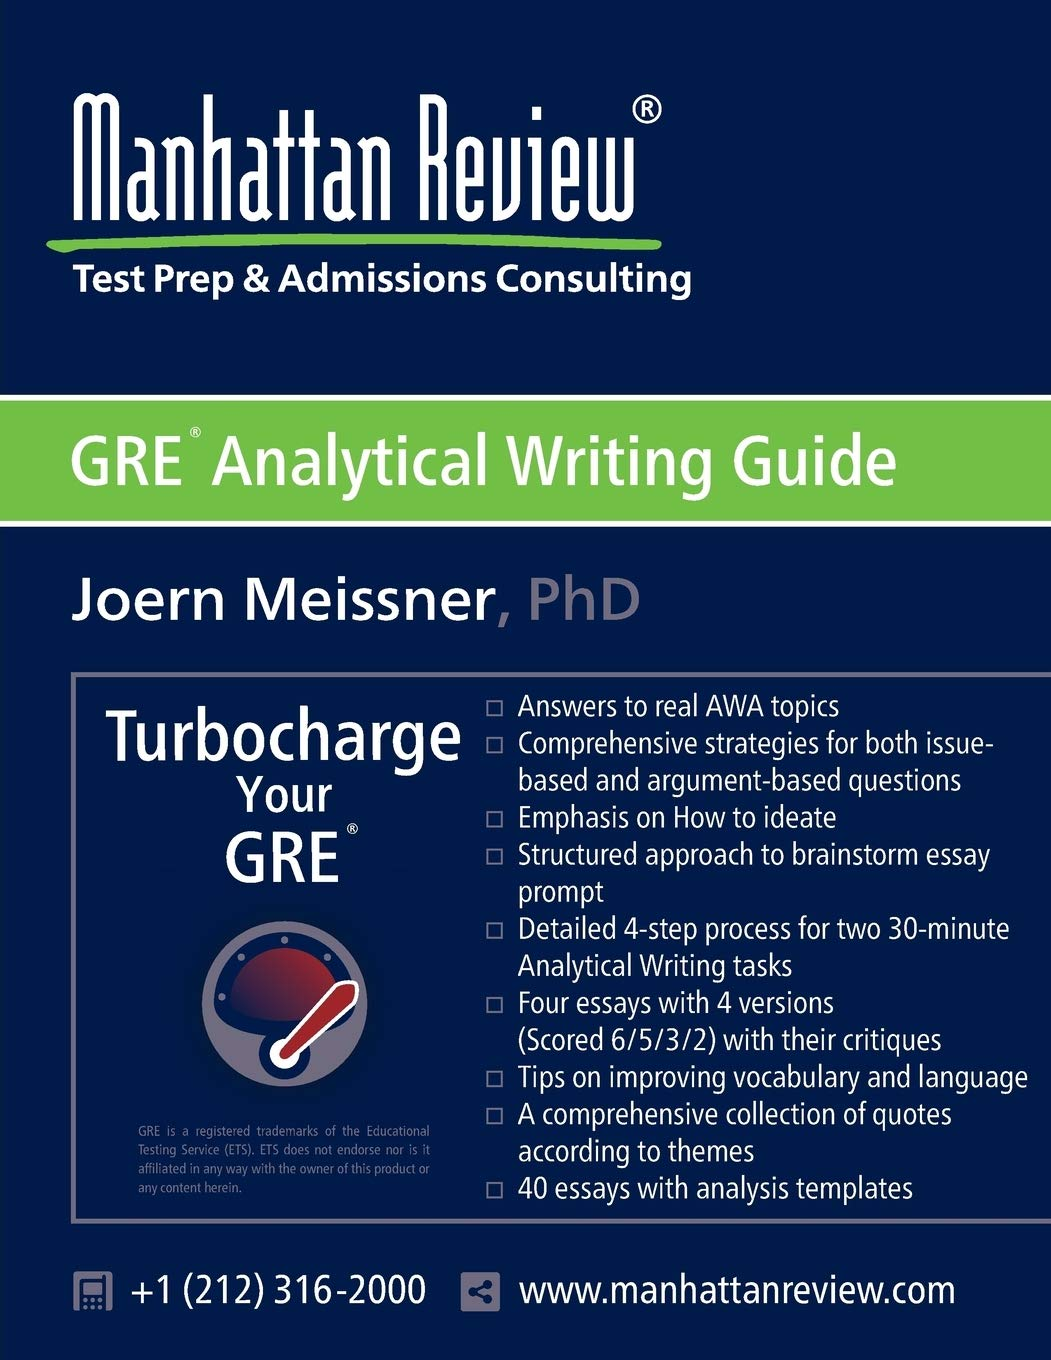 Manhattan Review’s GRE Analytical Writing Guide